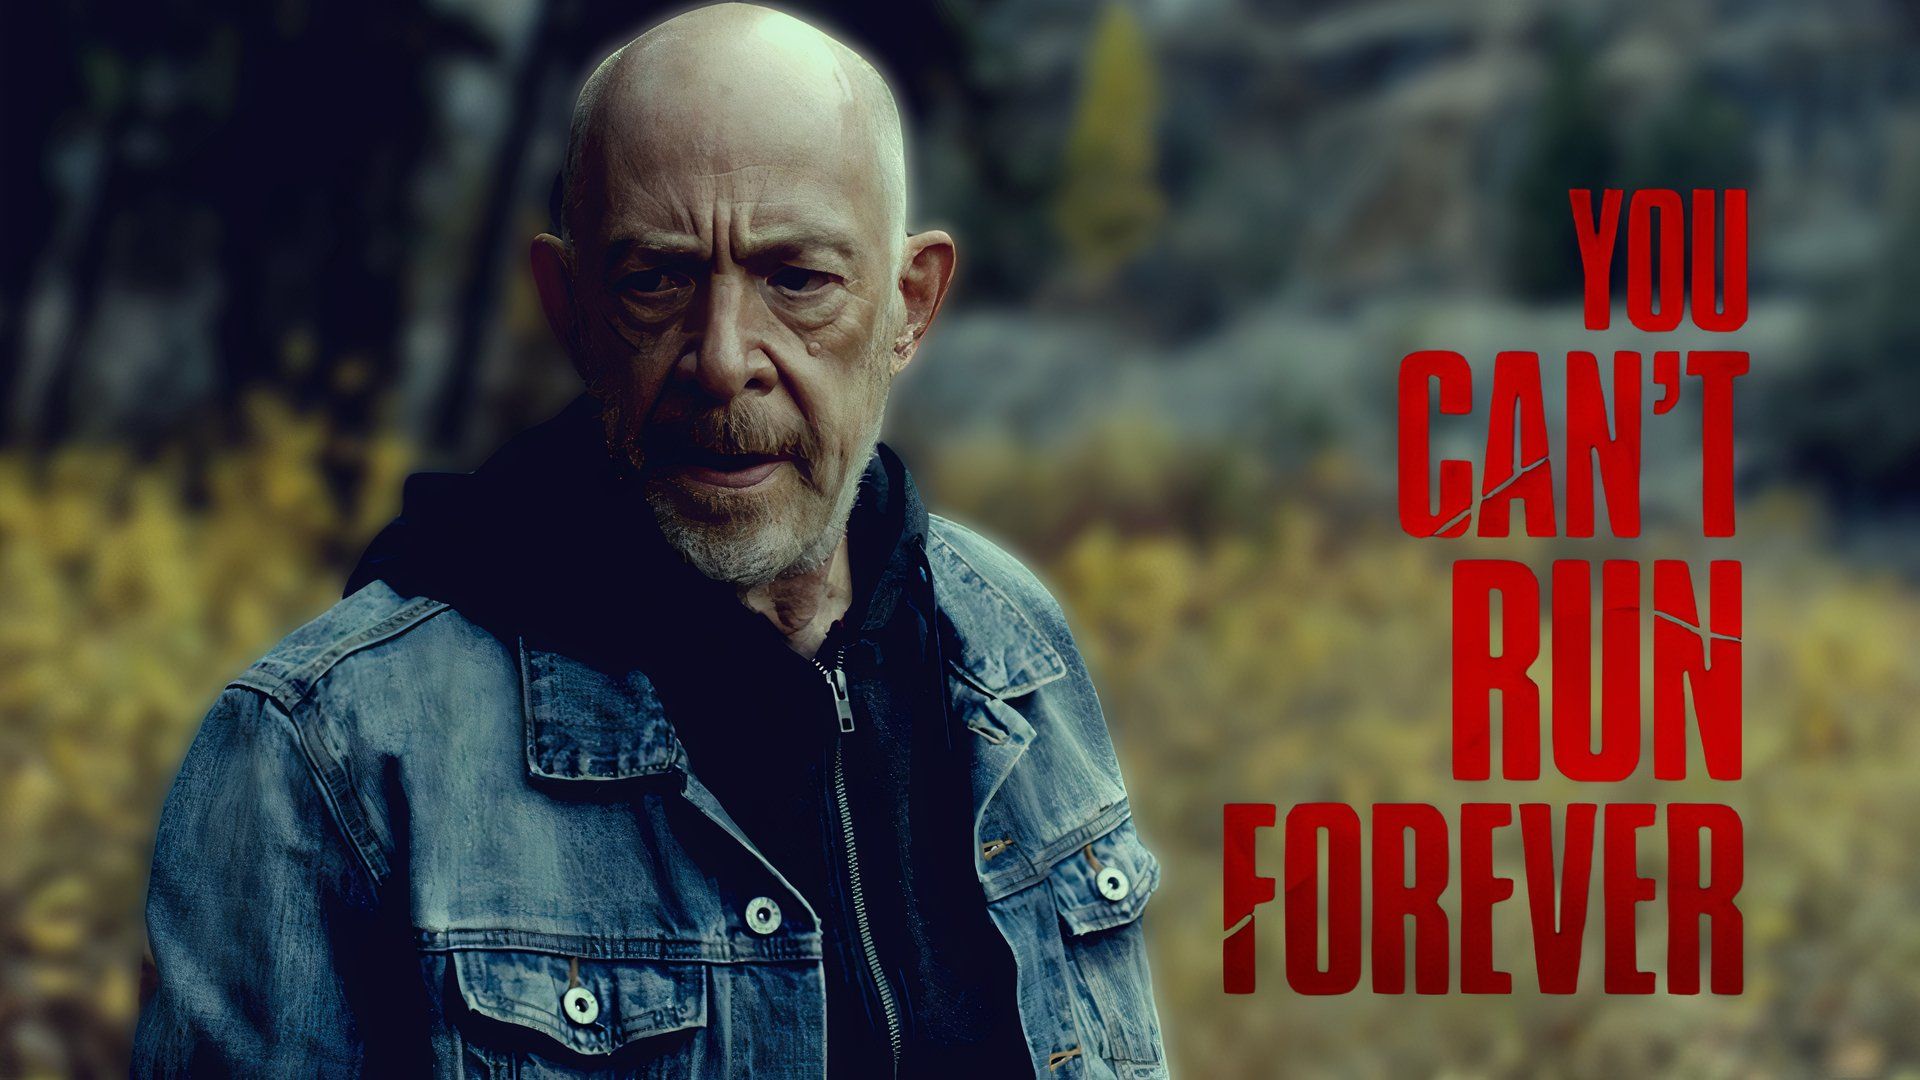 J.K. Simmons as Wade in a denim jacket in the movie You Can't Run Forever